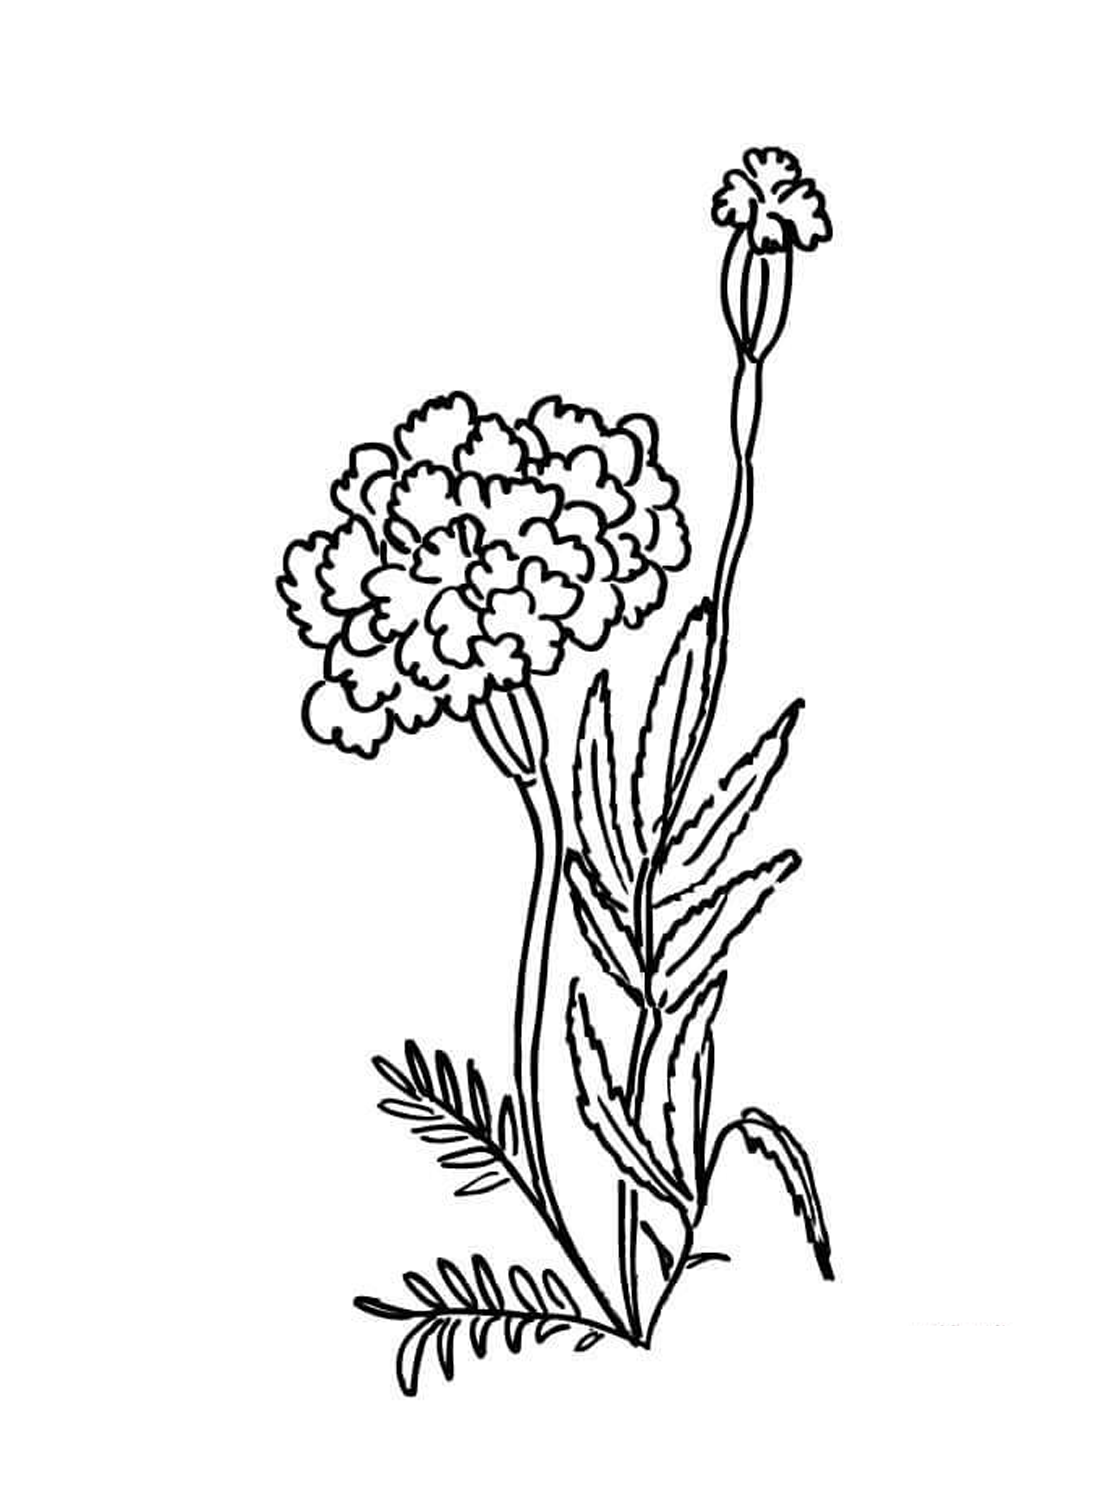 Marigolds For Kids Coloring Page